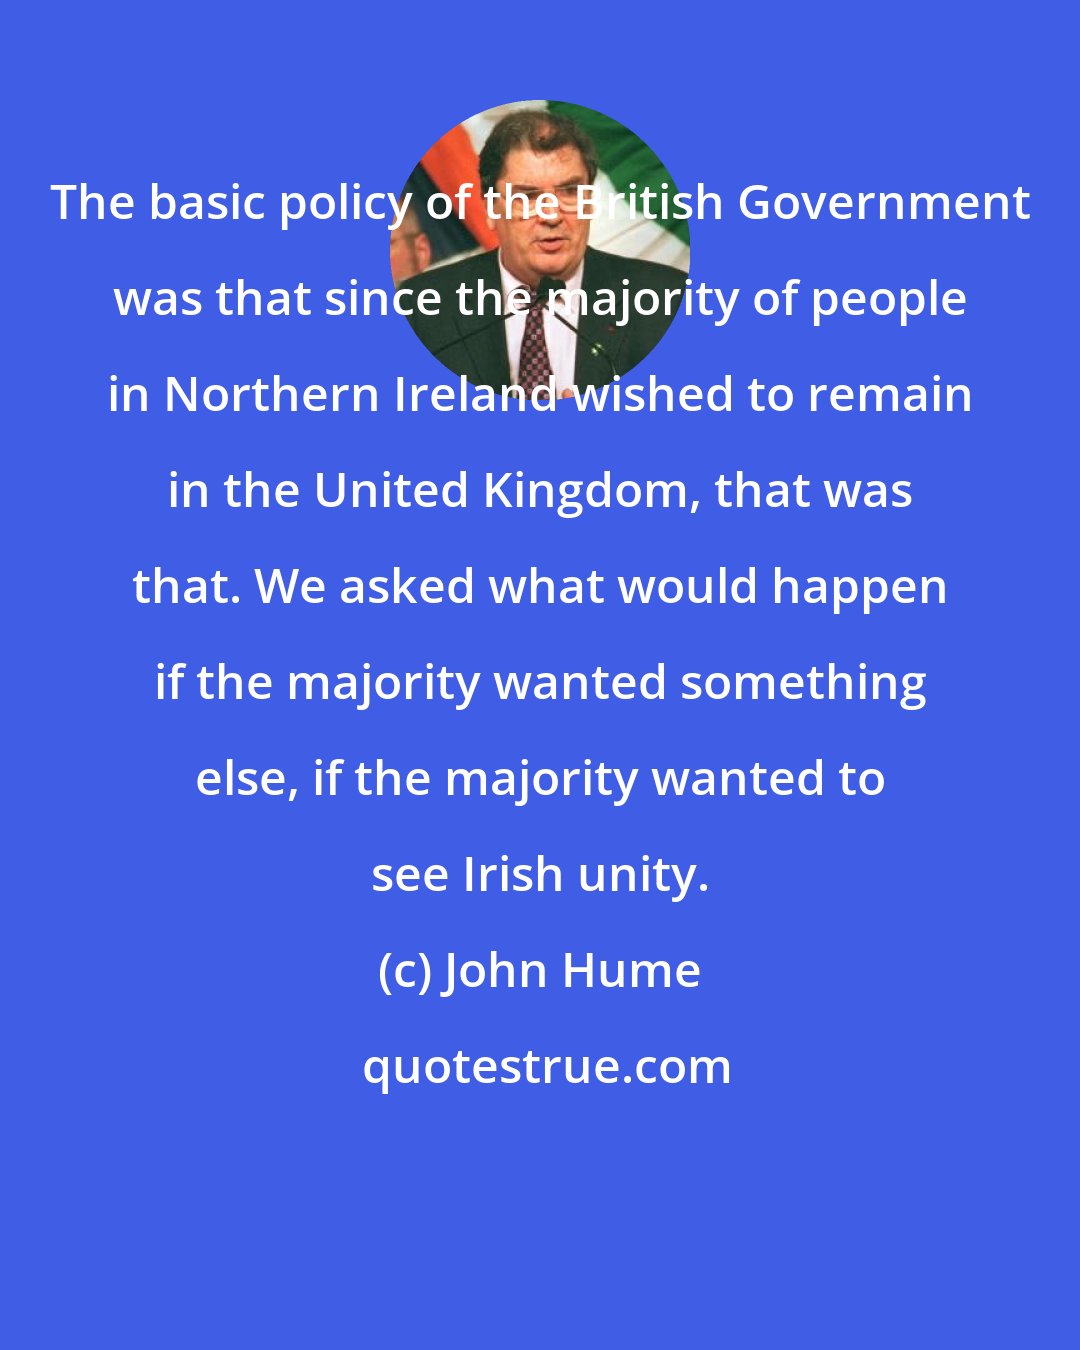 John Hume: The basic policy of the British Government was that since the majority of people in Northern Ireland wished to remain in the United Kingdom, that was that. We asked what would happen if the majority wanted something else, if the majority wanted to see Irish unity.